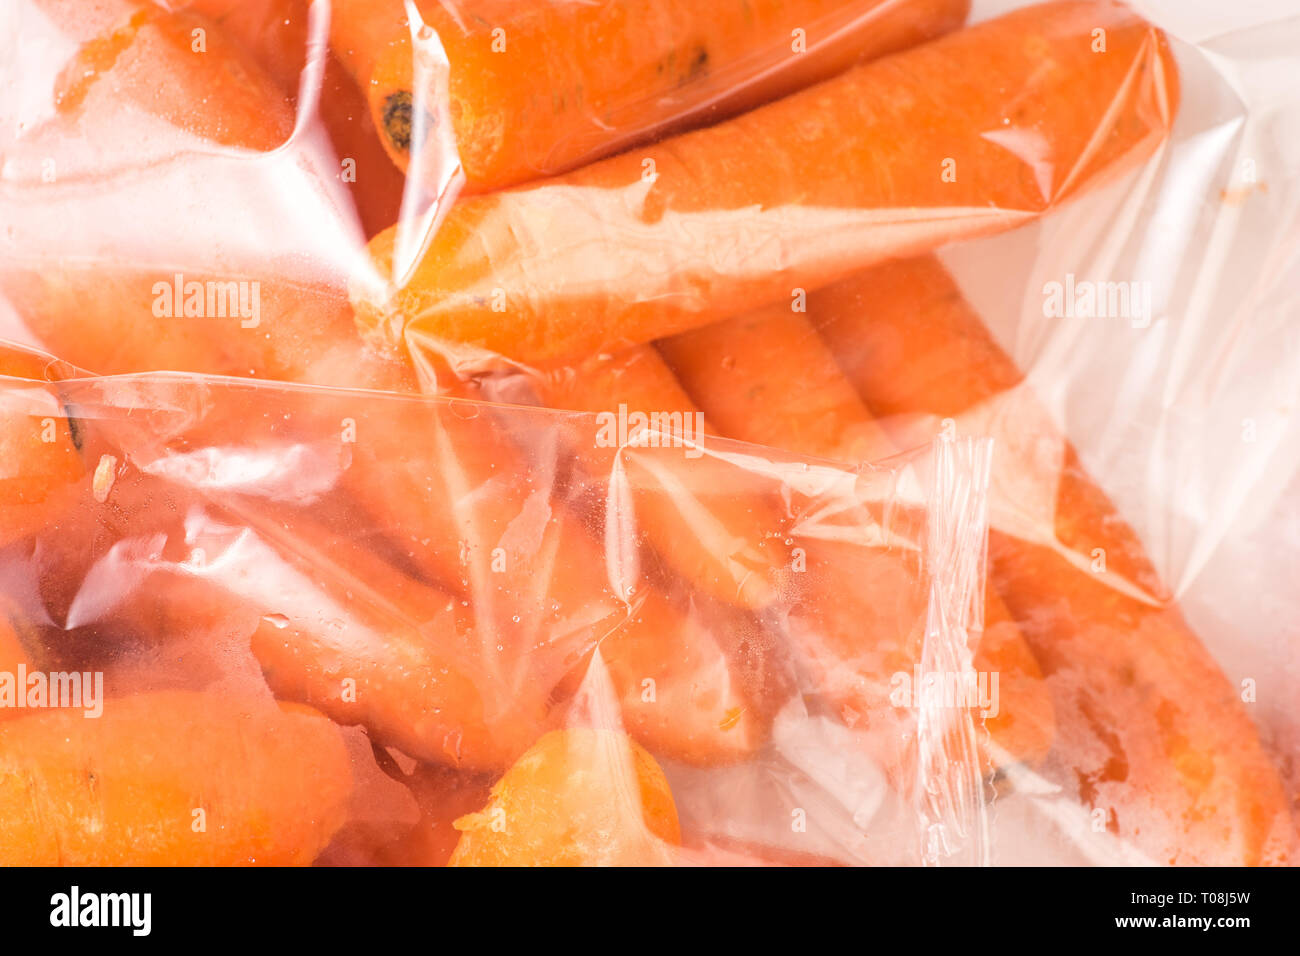 Bunch of organic Carrots packaged in plastic bag Stock Photo